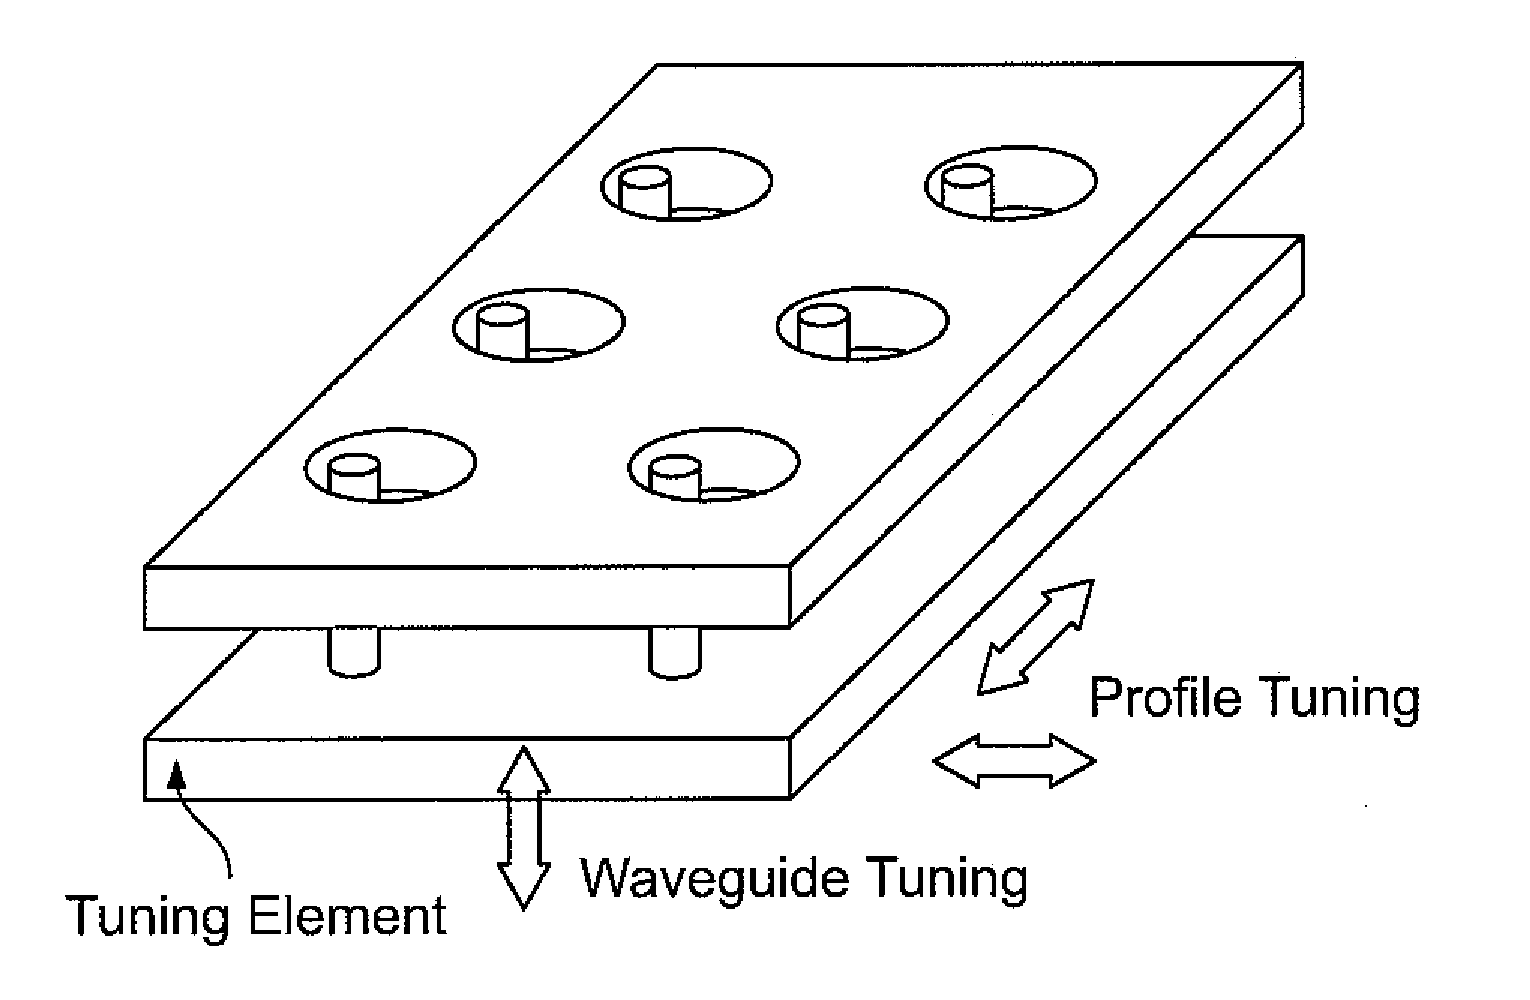 Tunable resonant leaky-mode N/MEMS elements and uses in optical devices